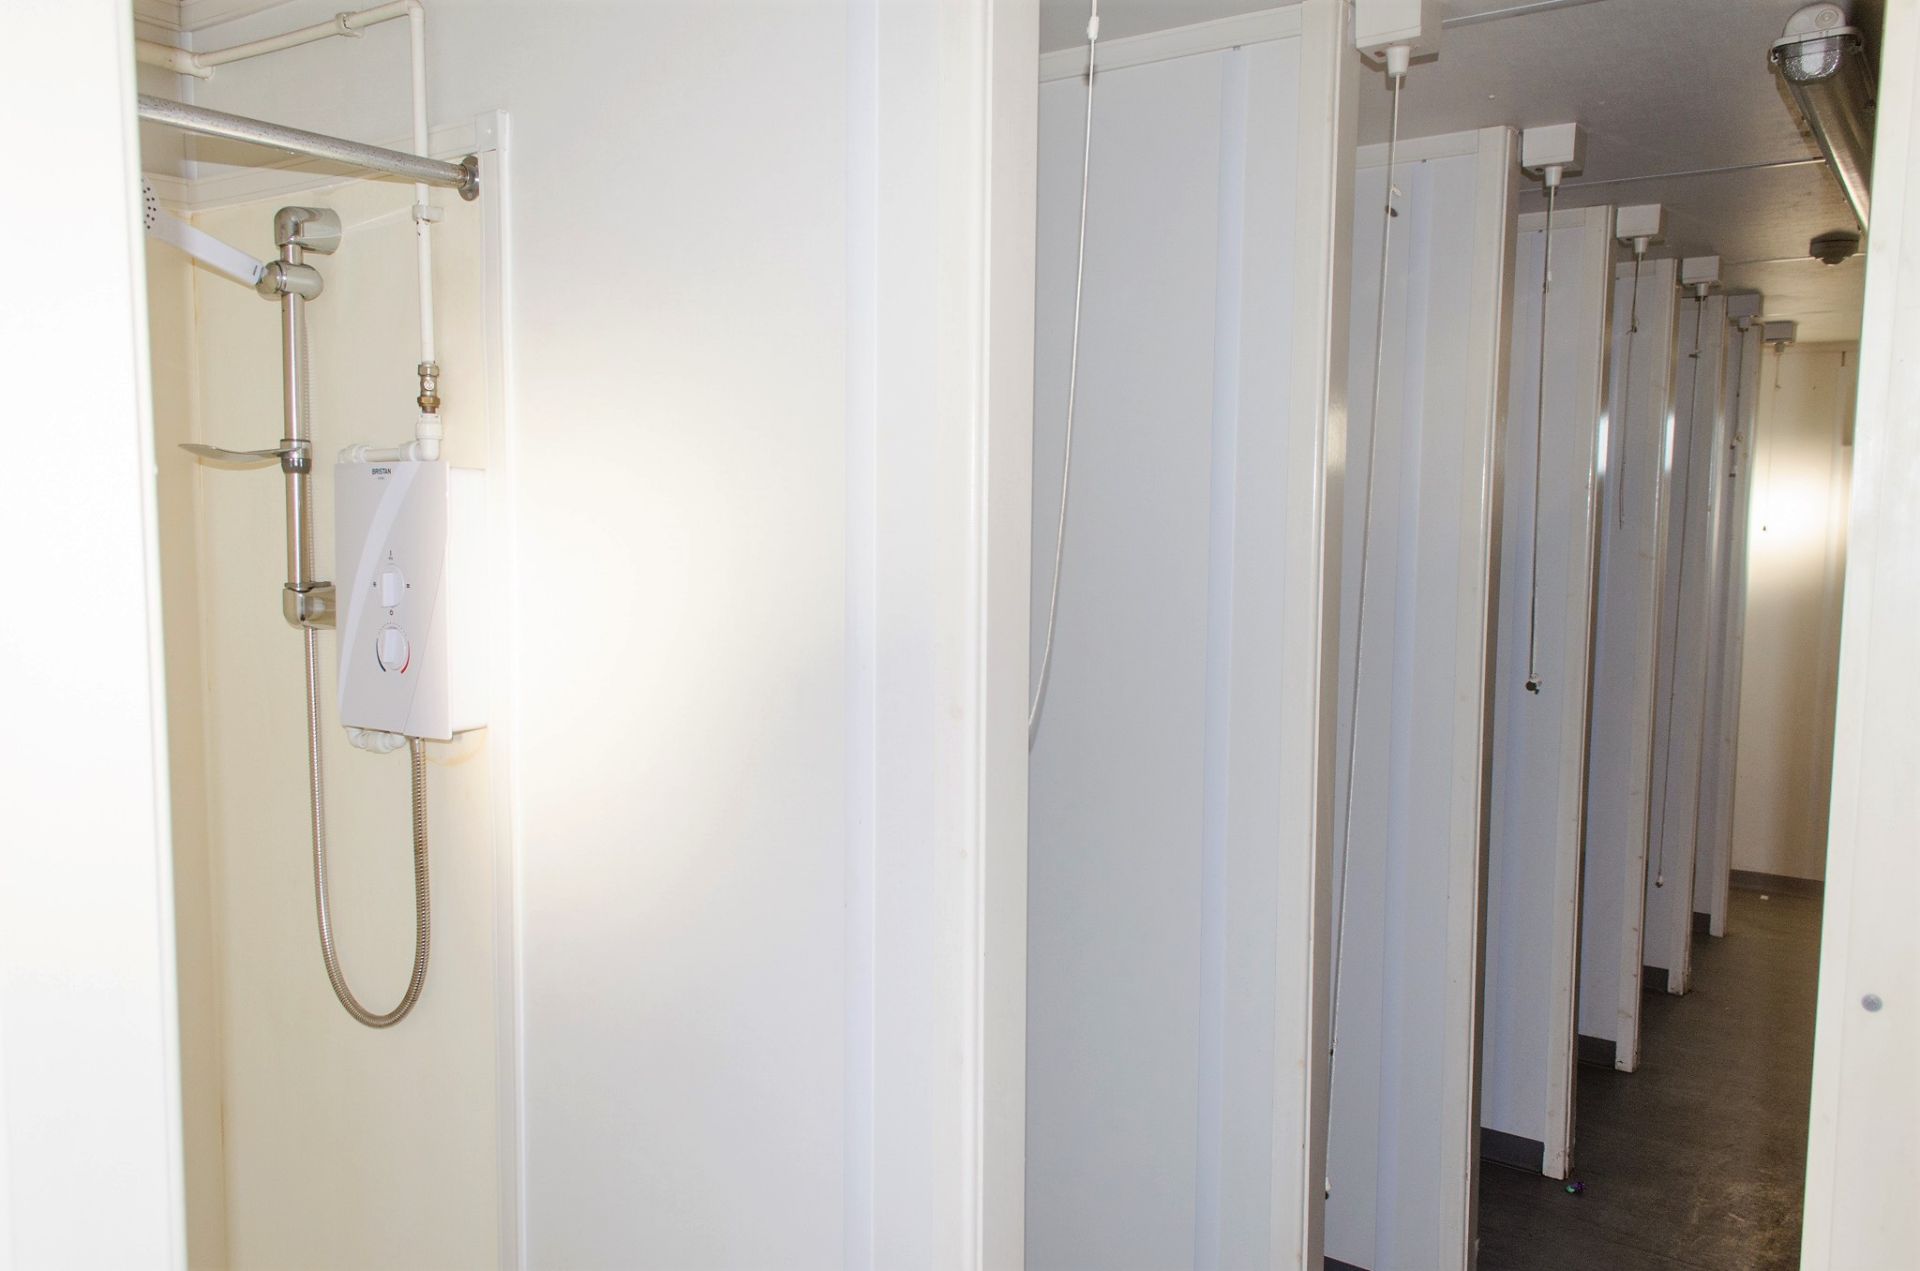 32ft x 9ft steel anti vandal shower site unit Comprising of 8 shower cubicles & changing area c/w - Image 8 of 8